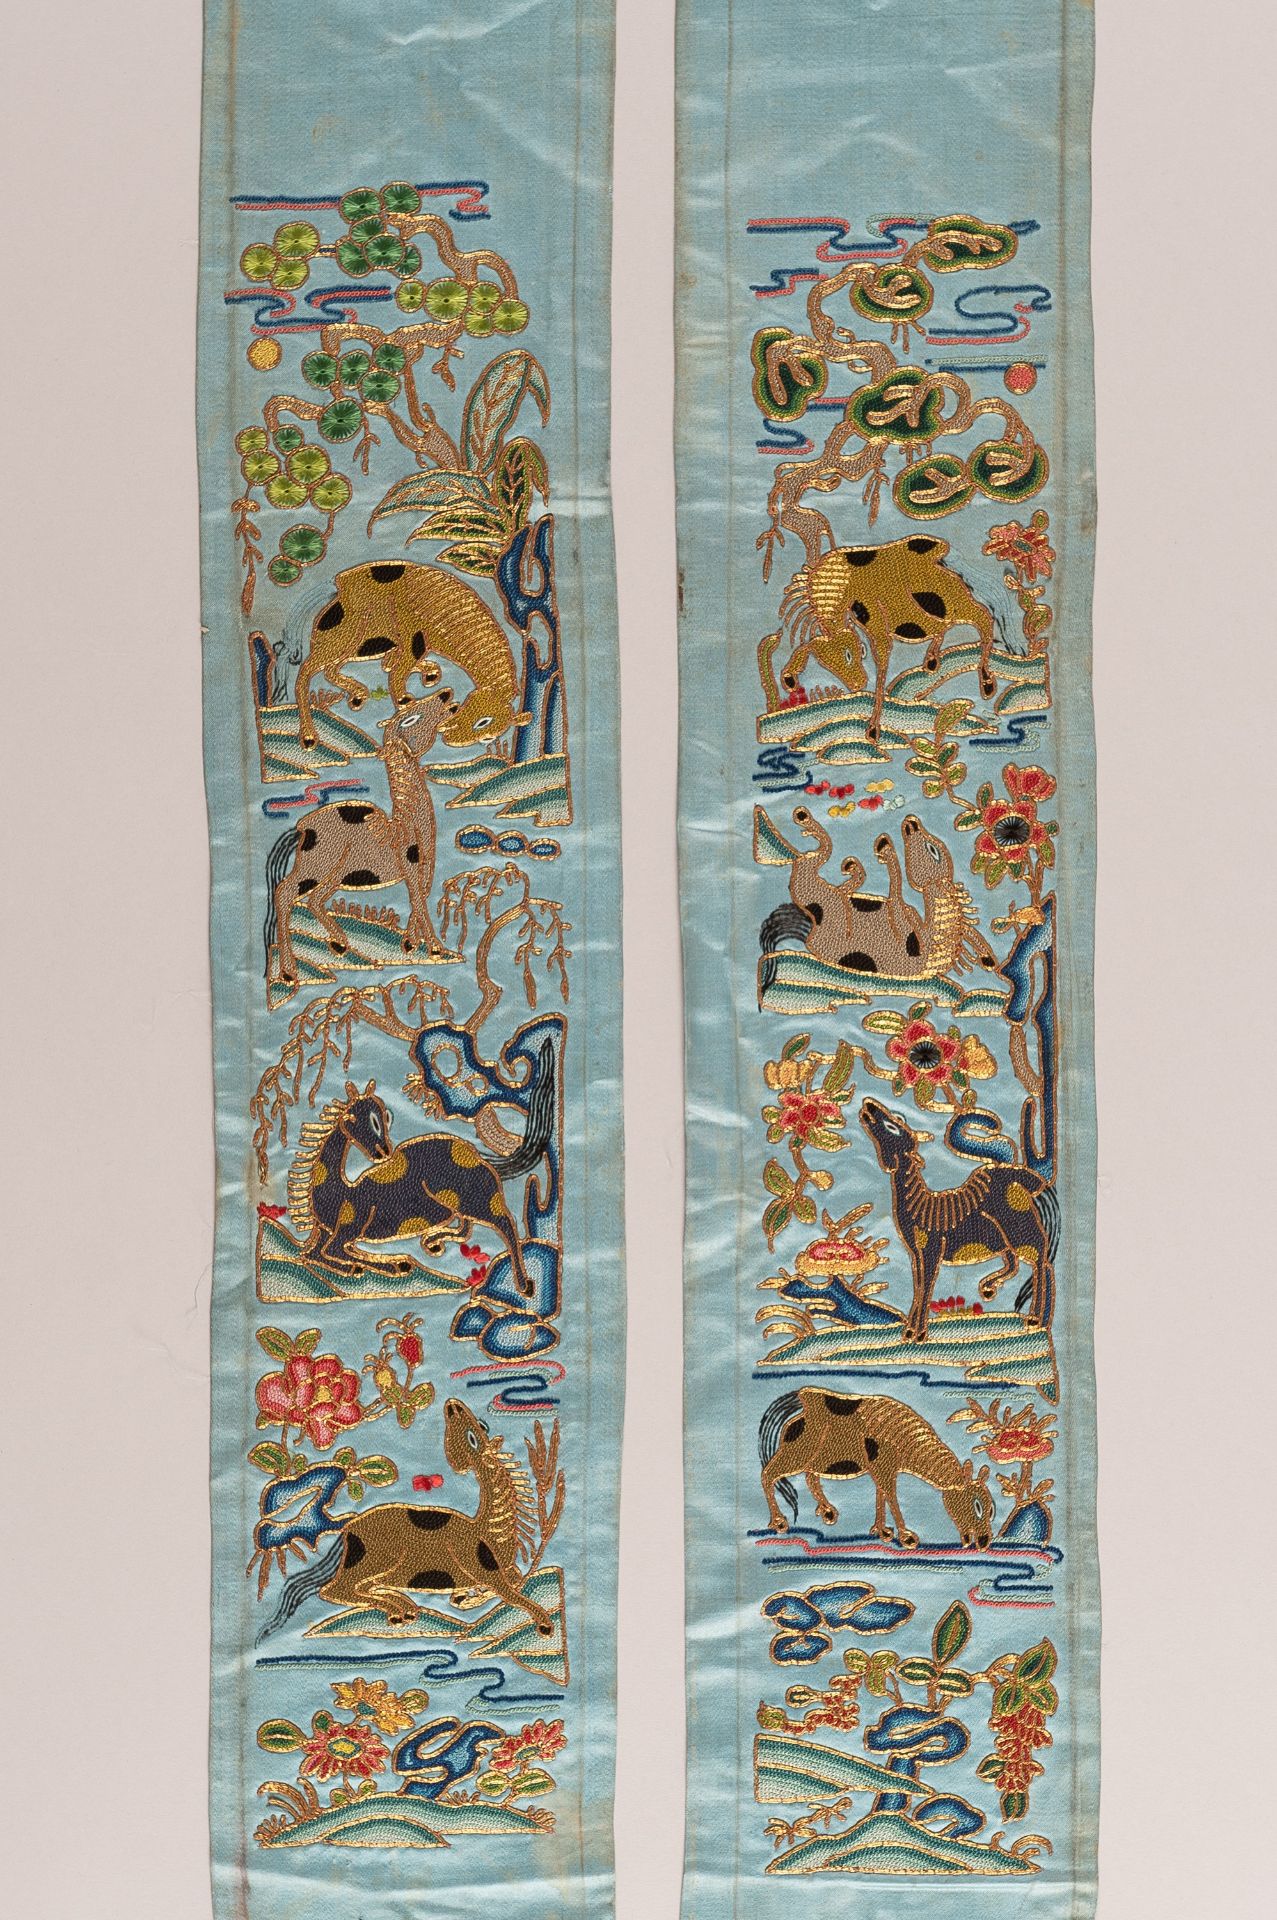 A PAIR OF 'EIGHT HORSES OF MUWANG' SILK SLEEVE BANDS, LATE QING DYNASTY